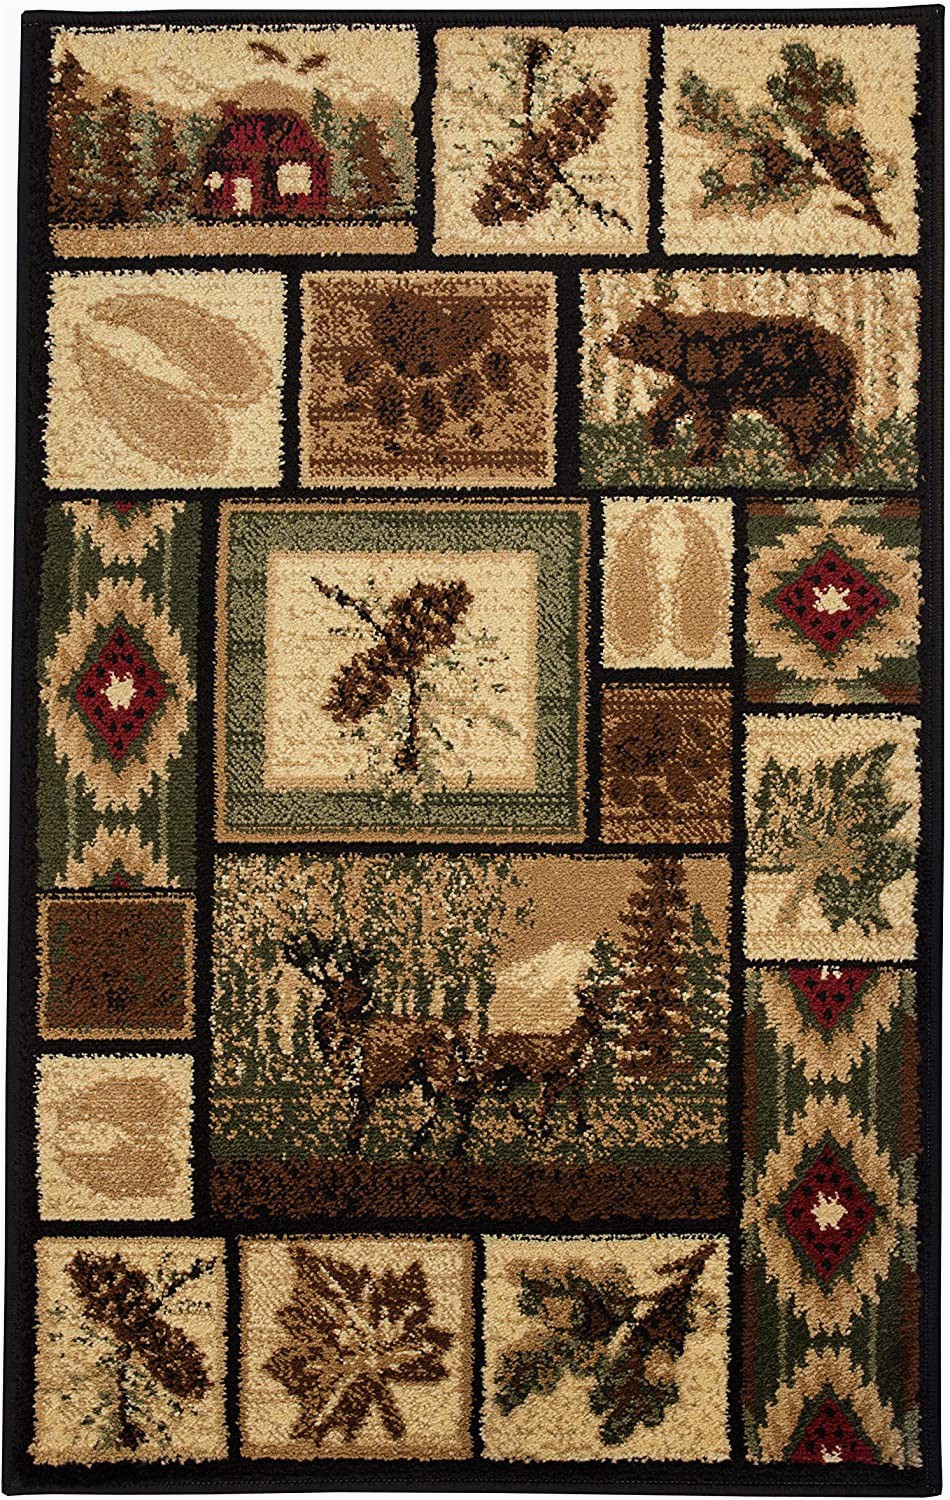 Cabin area Rugs for Sale Rugs 4 Less Collection Rustic Western and Native American Wildlife and Wilderness Cabin Lodge Accent area Rug R4l 386 2×3